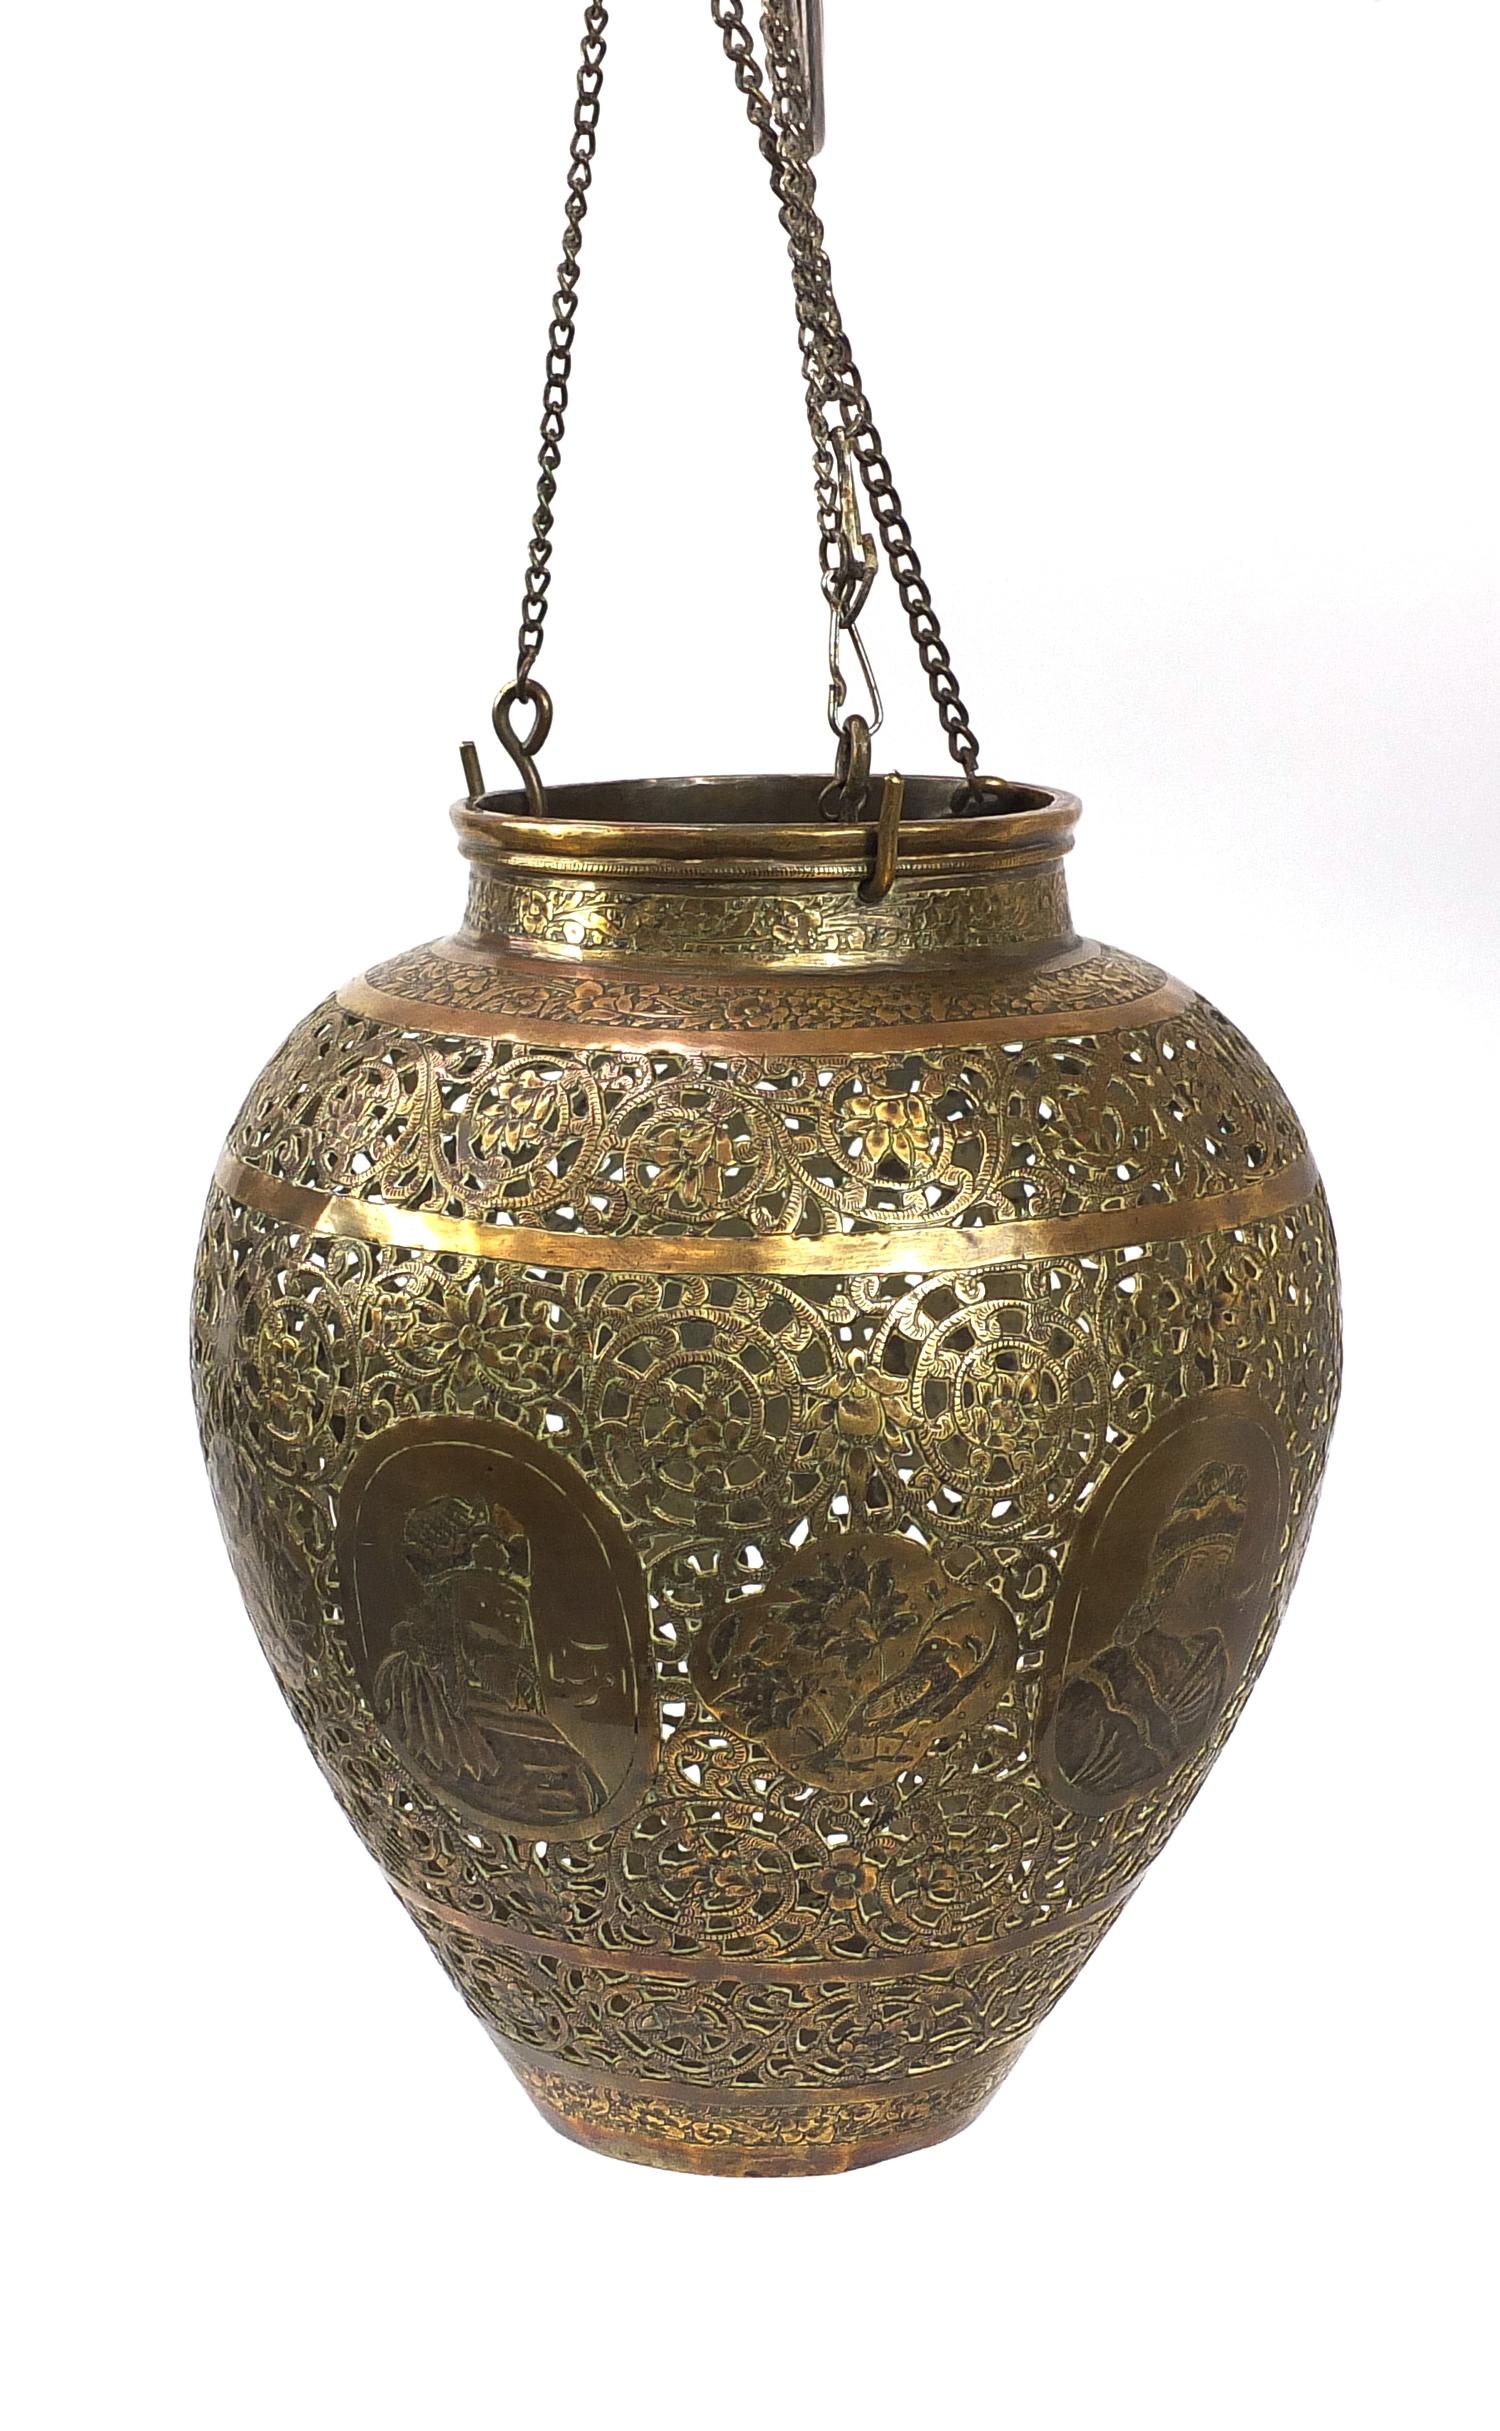 18th century Persian open work lamp engraved with panels of consorts and birds, 22.5cm high : For - Image 3 of 5